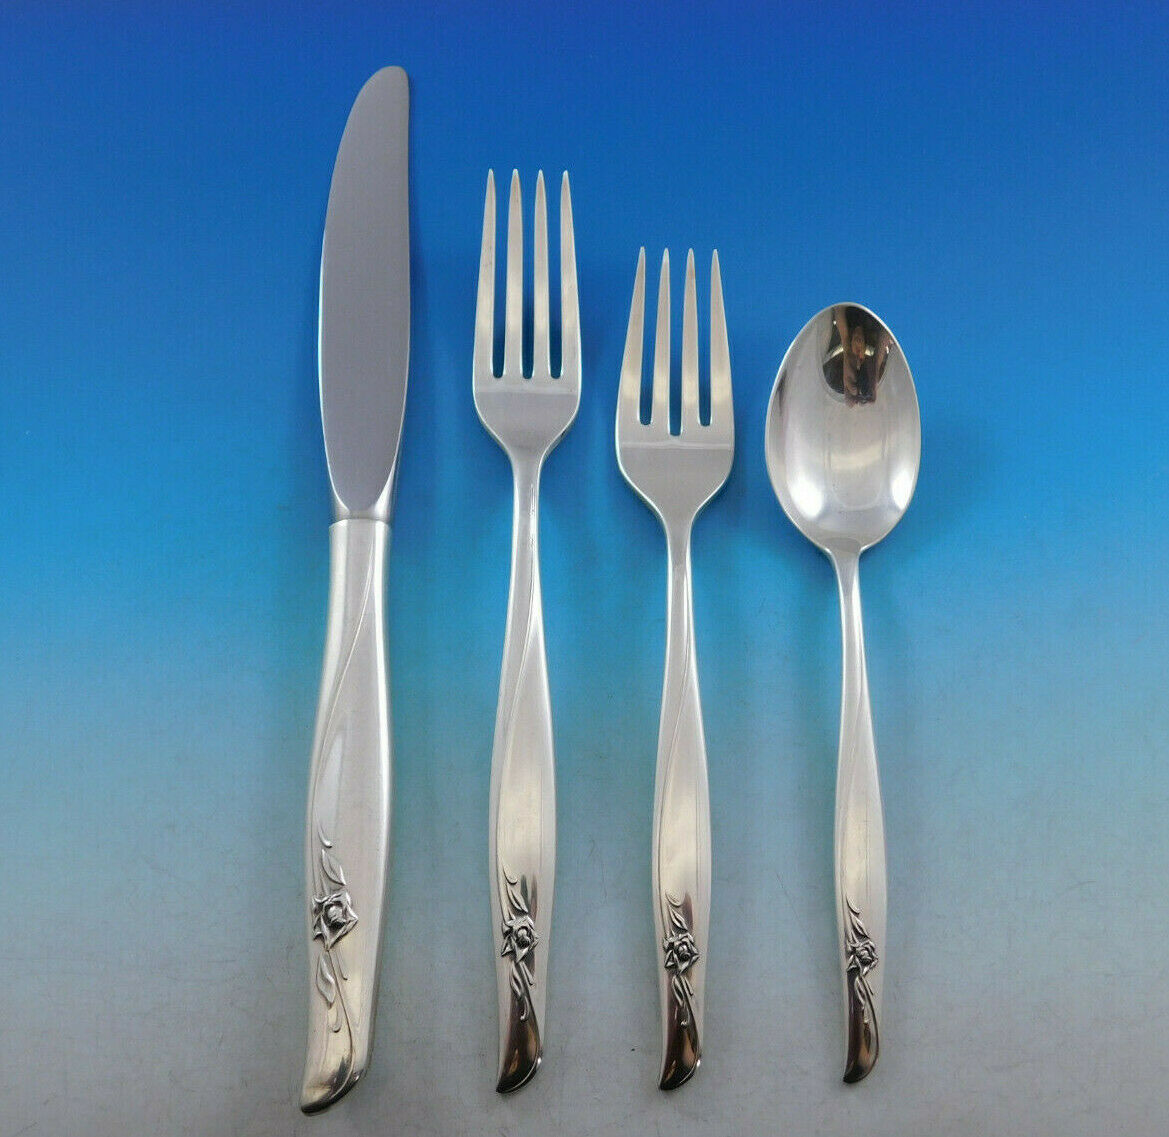 Primary image for Sea Rose by Gorham Sterling Silver Flatware Set 12 Service 53 pieces Modern